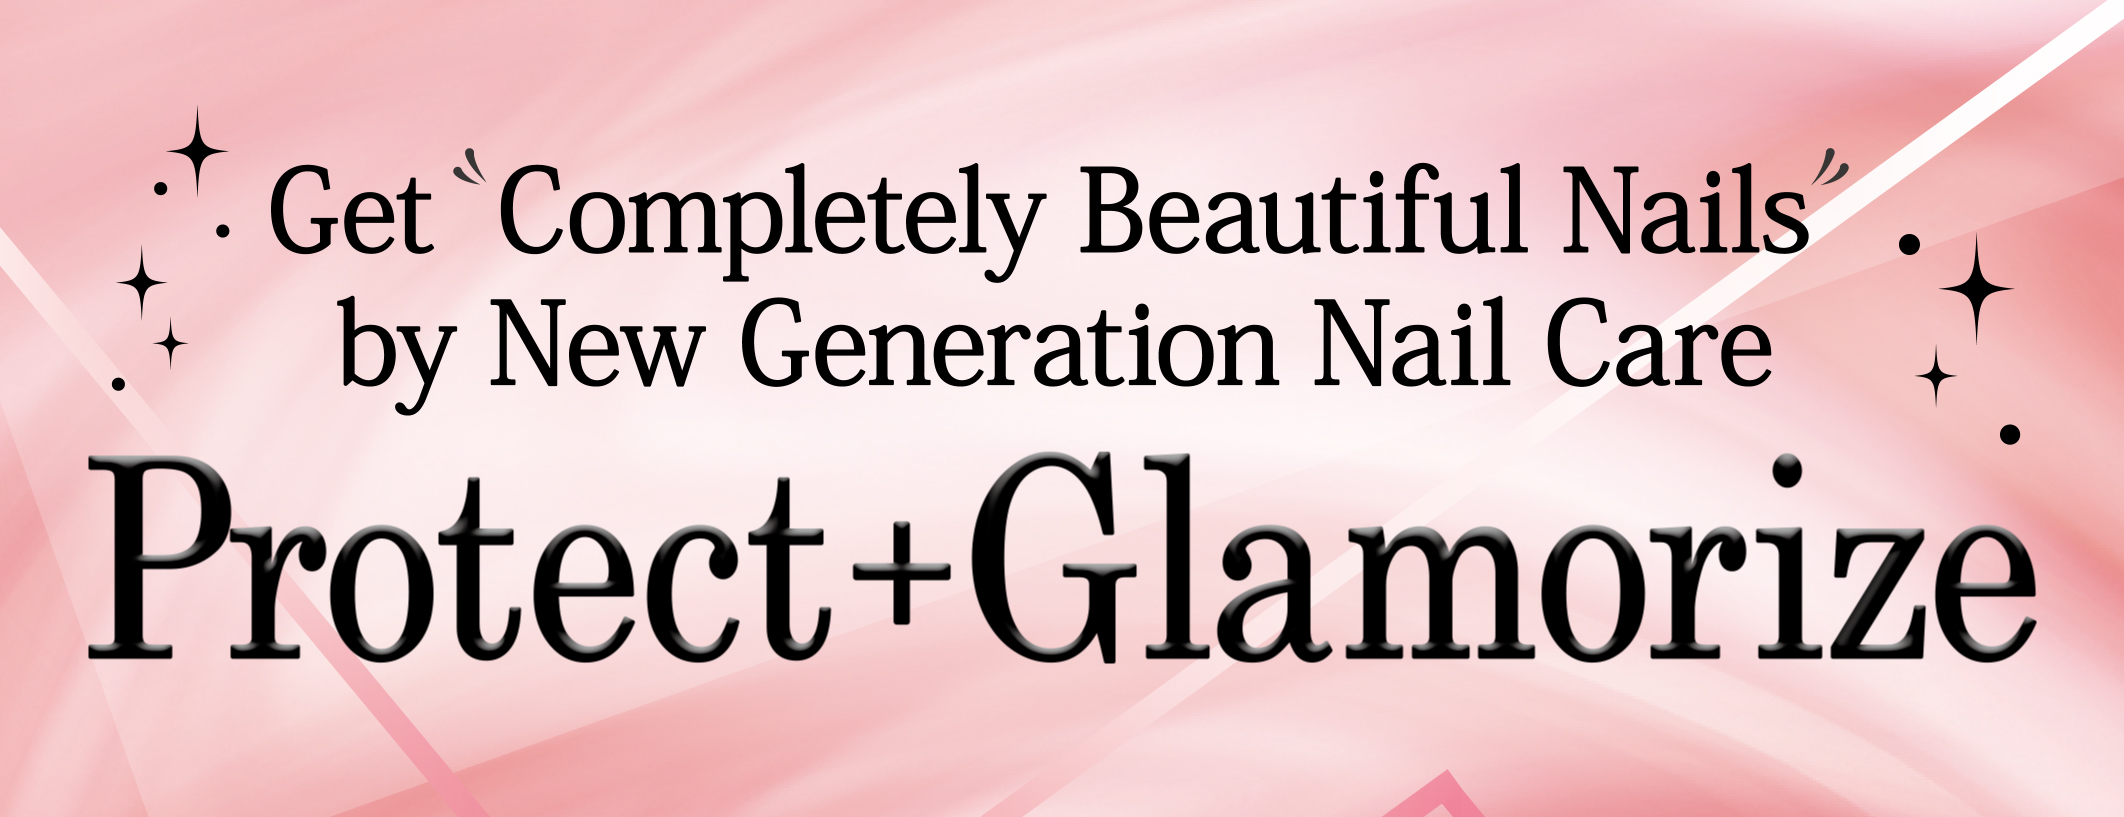 Get Completely Beautiful Nails by “New Generation Protect + Glamorize” Nail Care